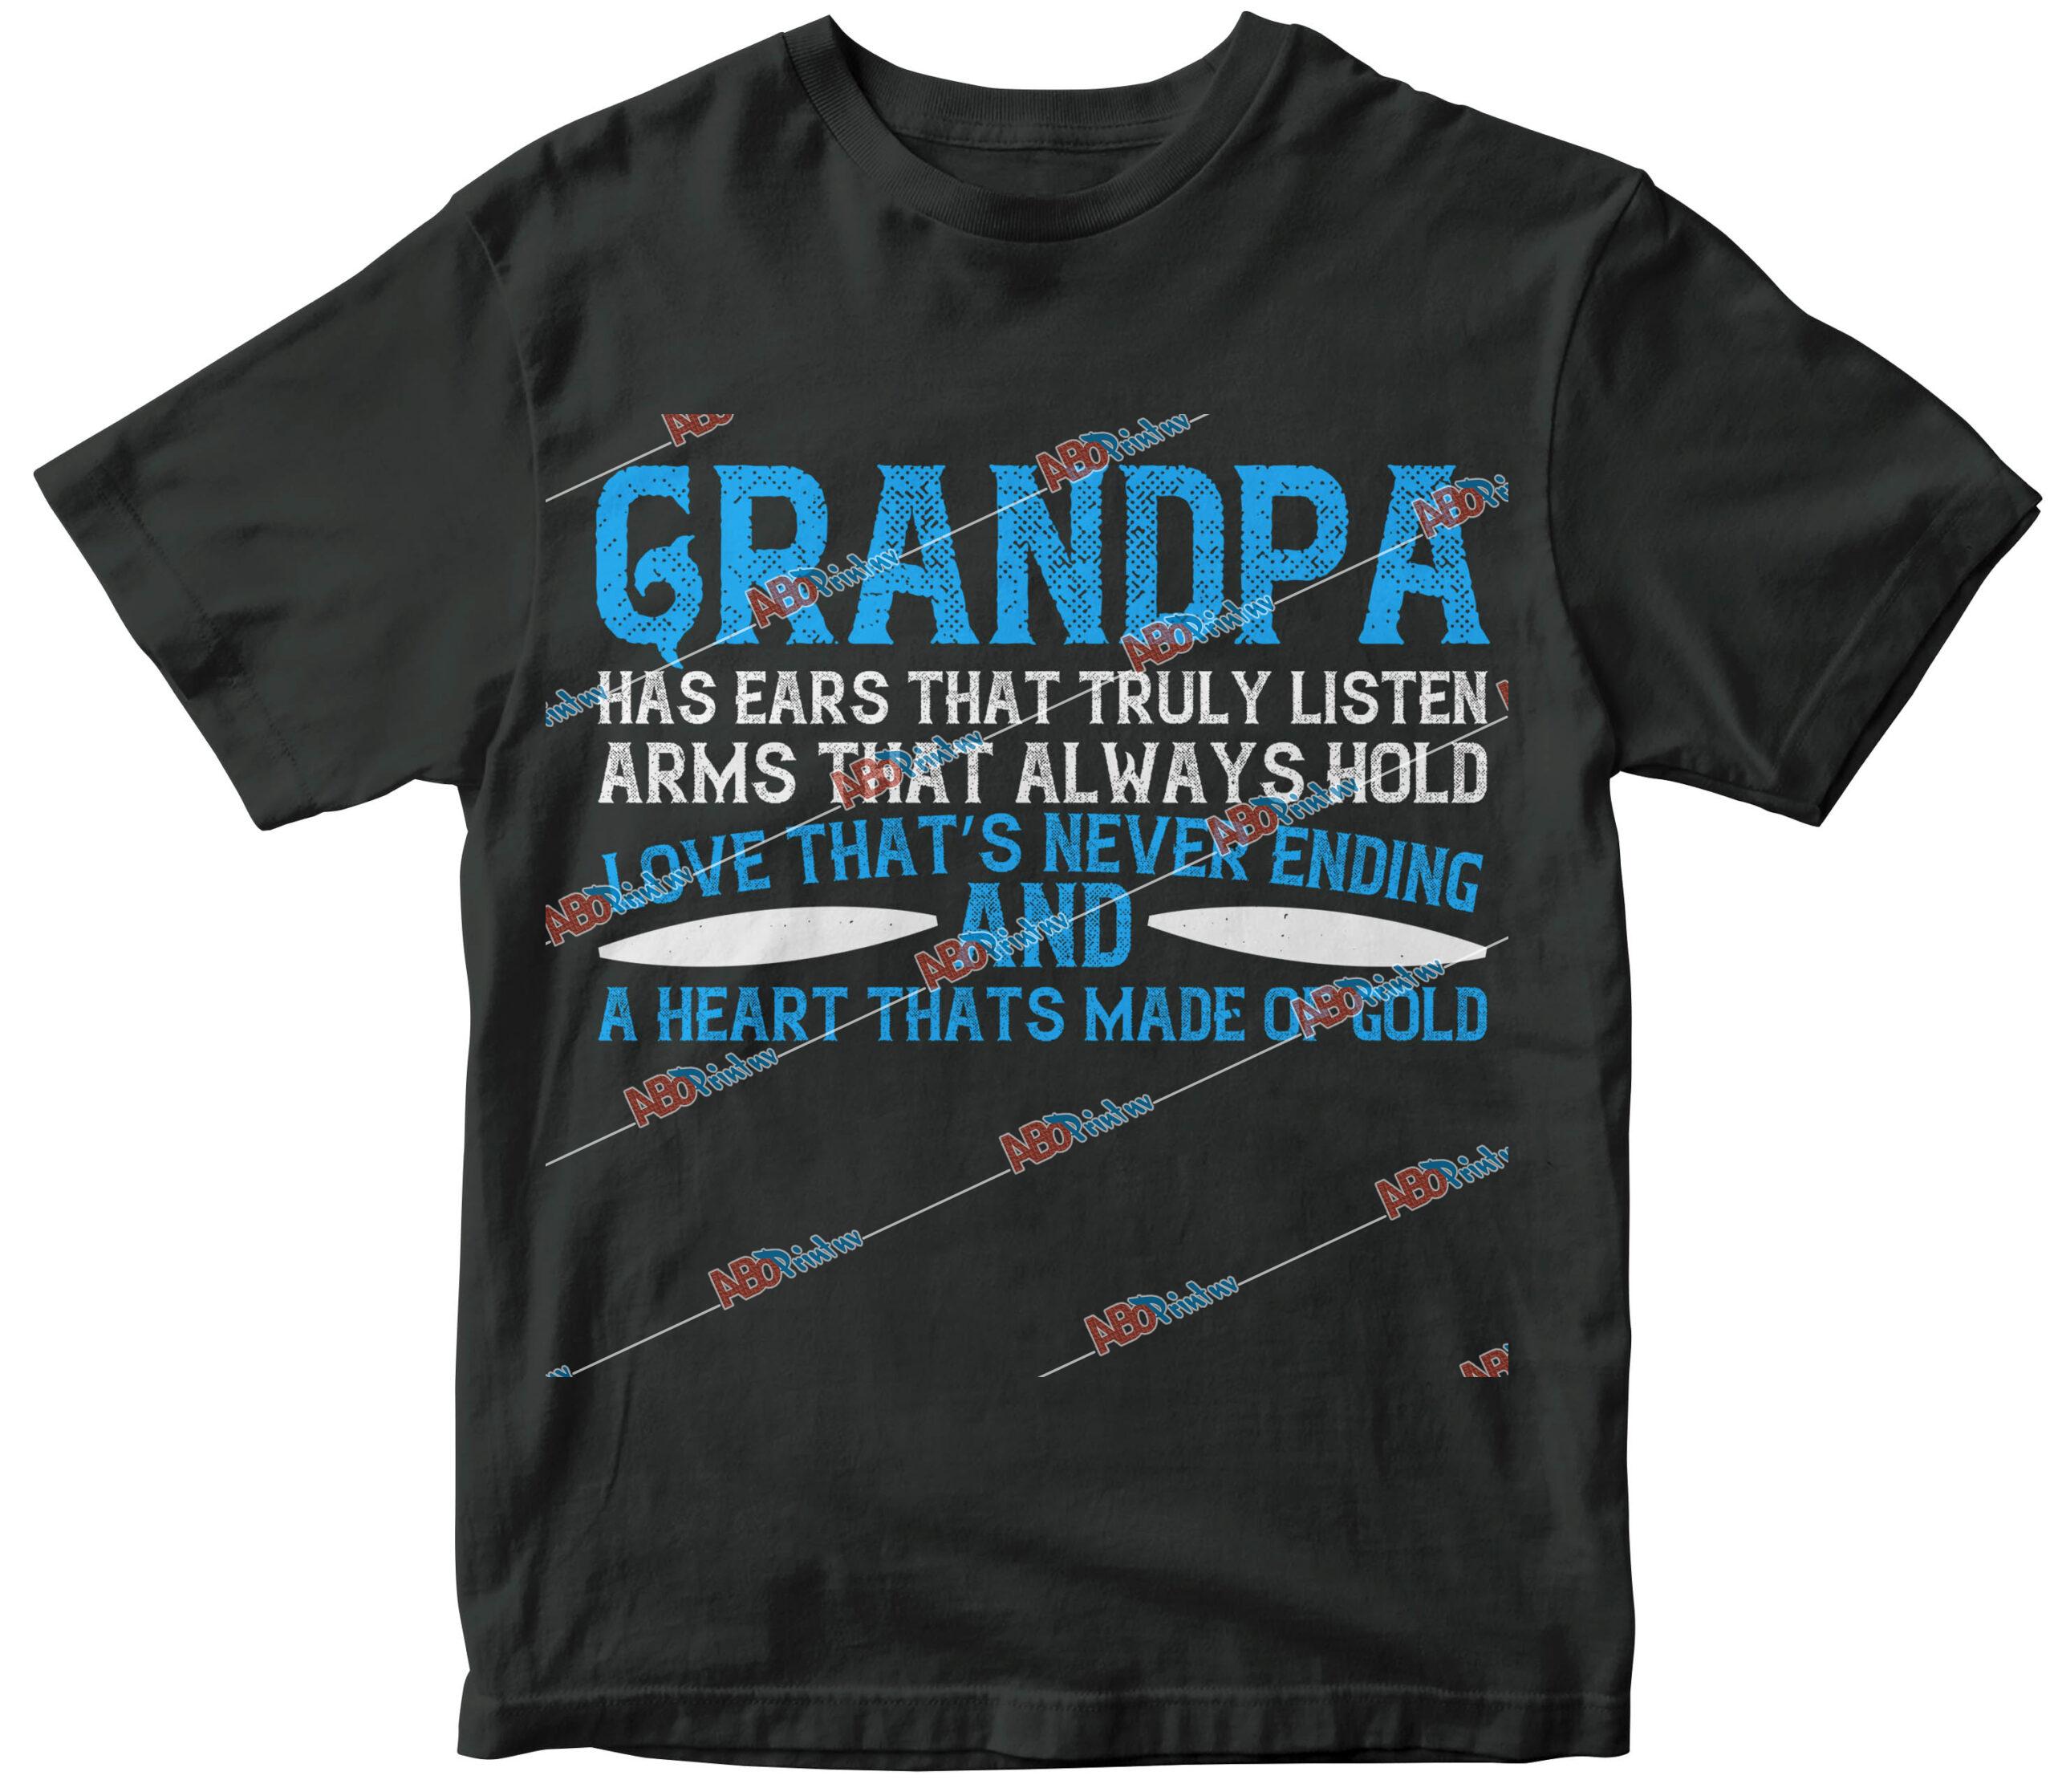 Grandpa has ears that truly listen arms that always hold-02.jpg